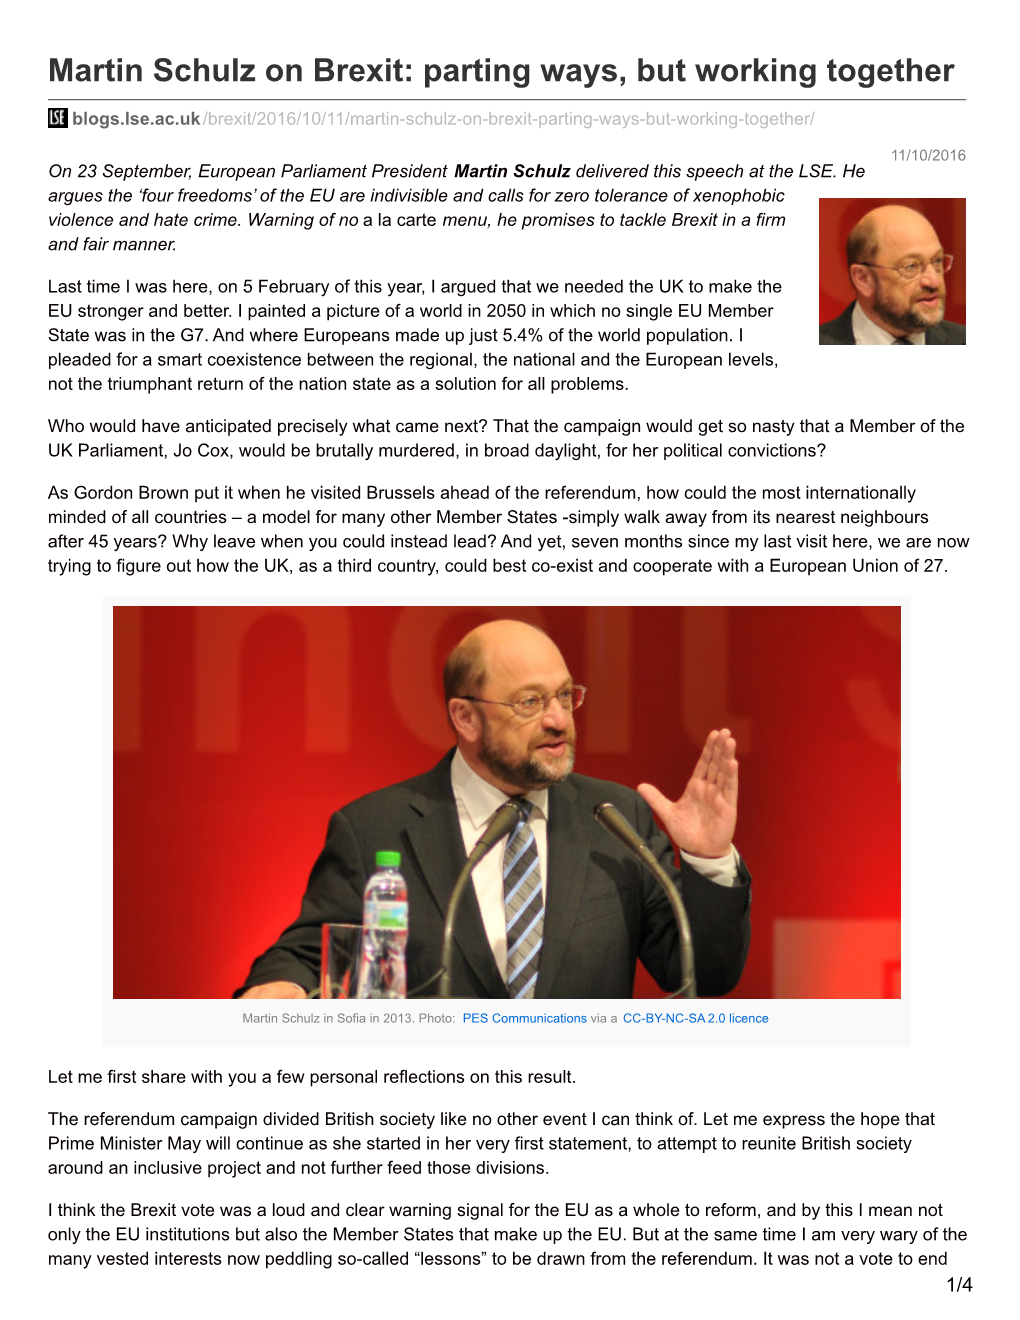 Martin Schulz on Brexit: Parting Ways, but Working Together